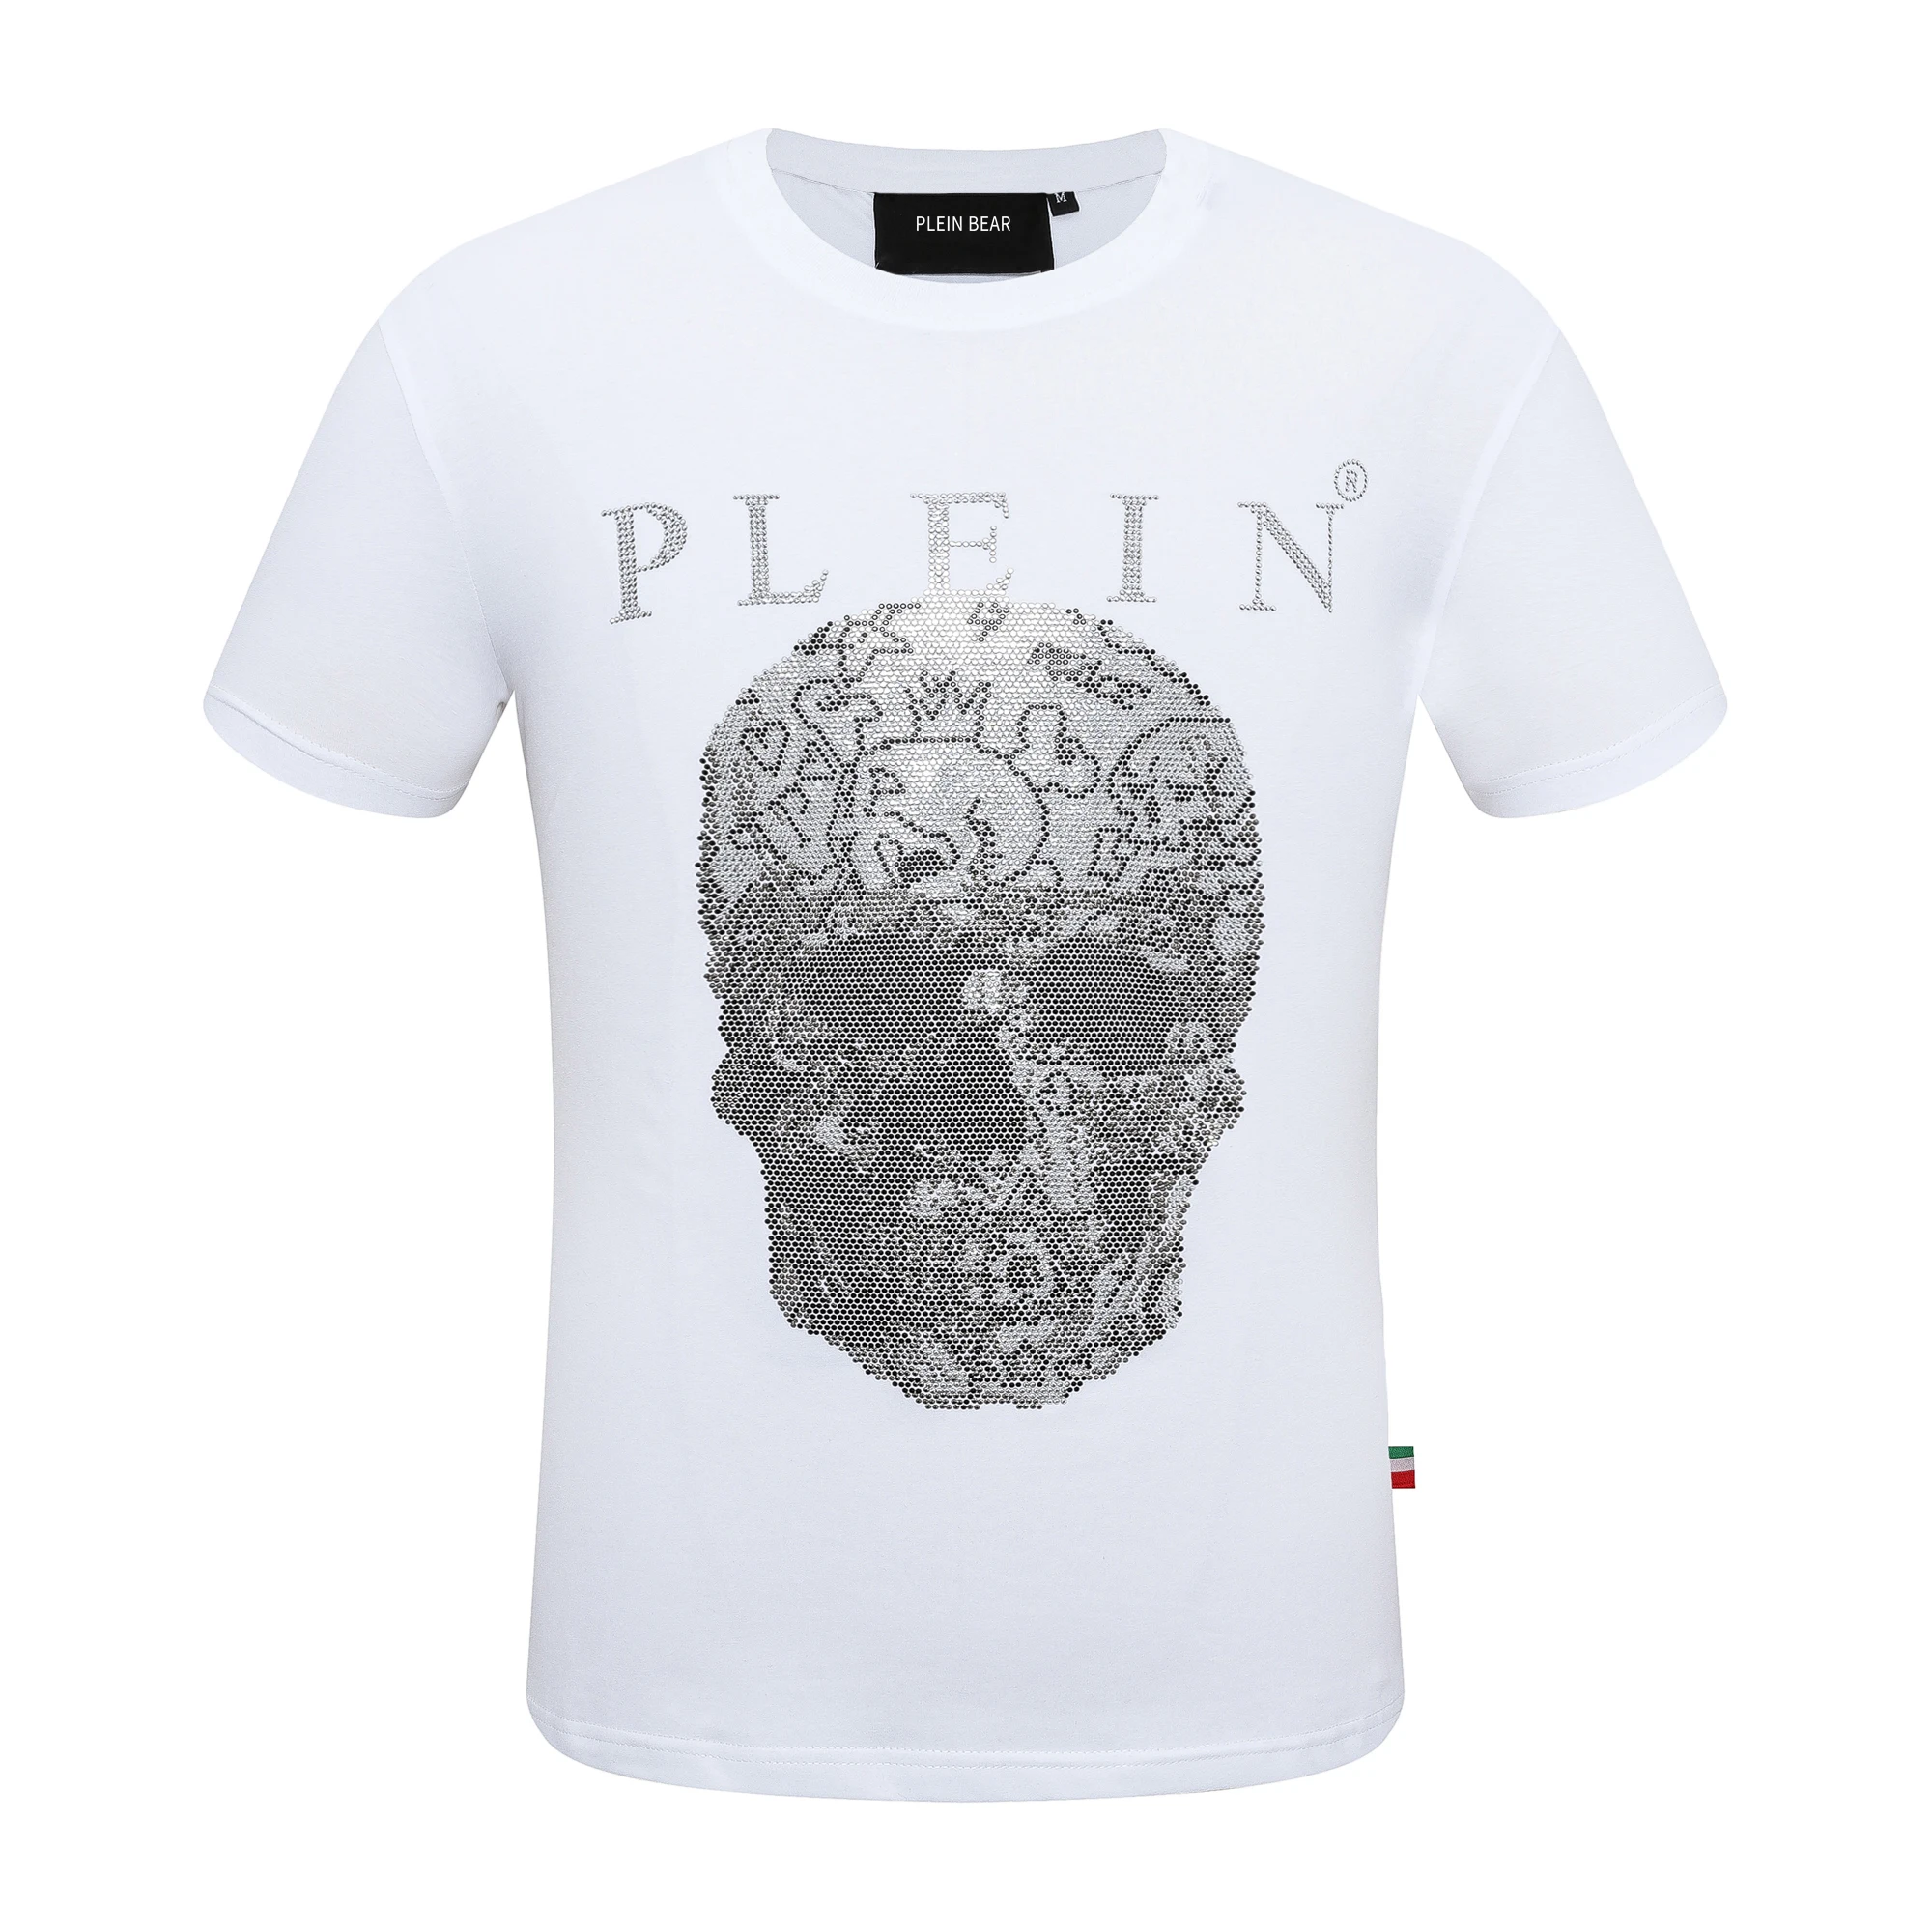 

PLEIN BEAR Men's JERSEY T-SHIRT ICONIC Classic T-shirt with Crystal Skull 100% Cotton T-shirts Men Tops Comfortable Tees 1022